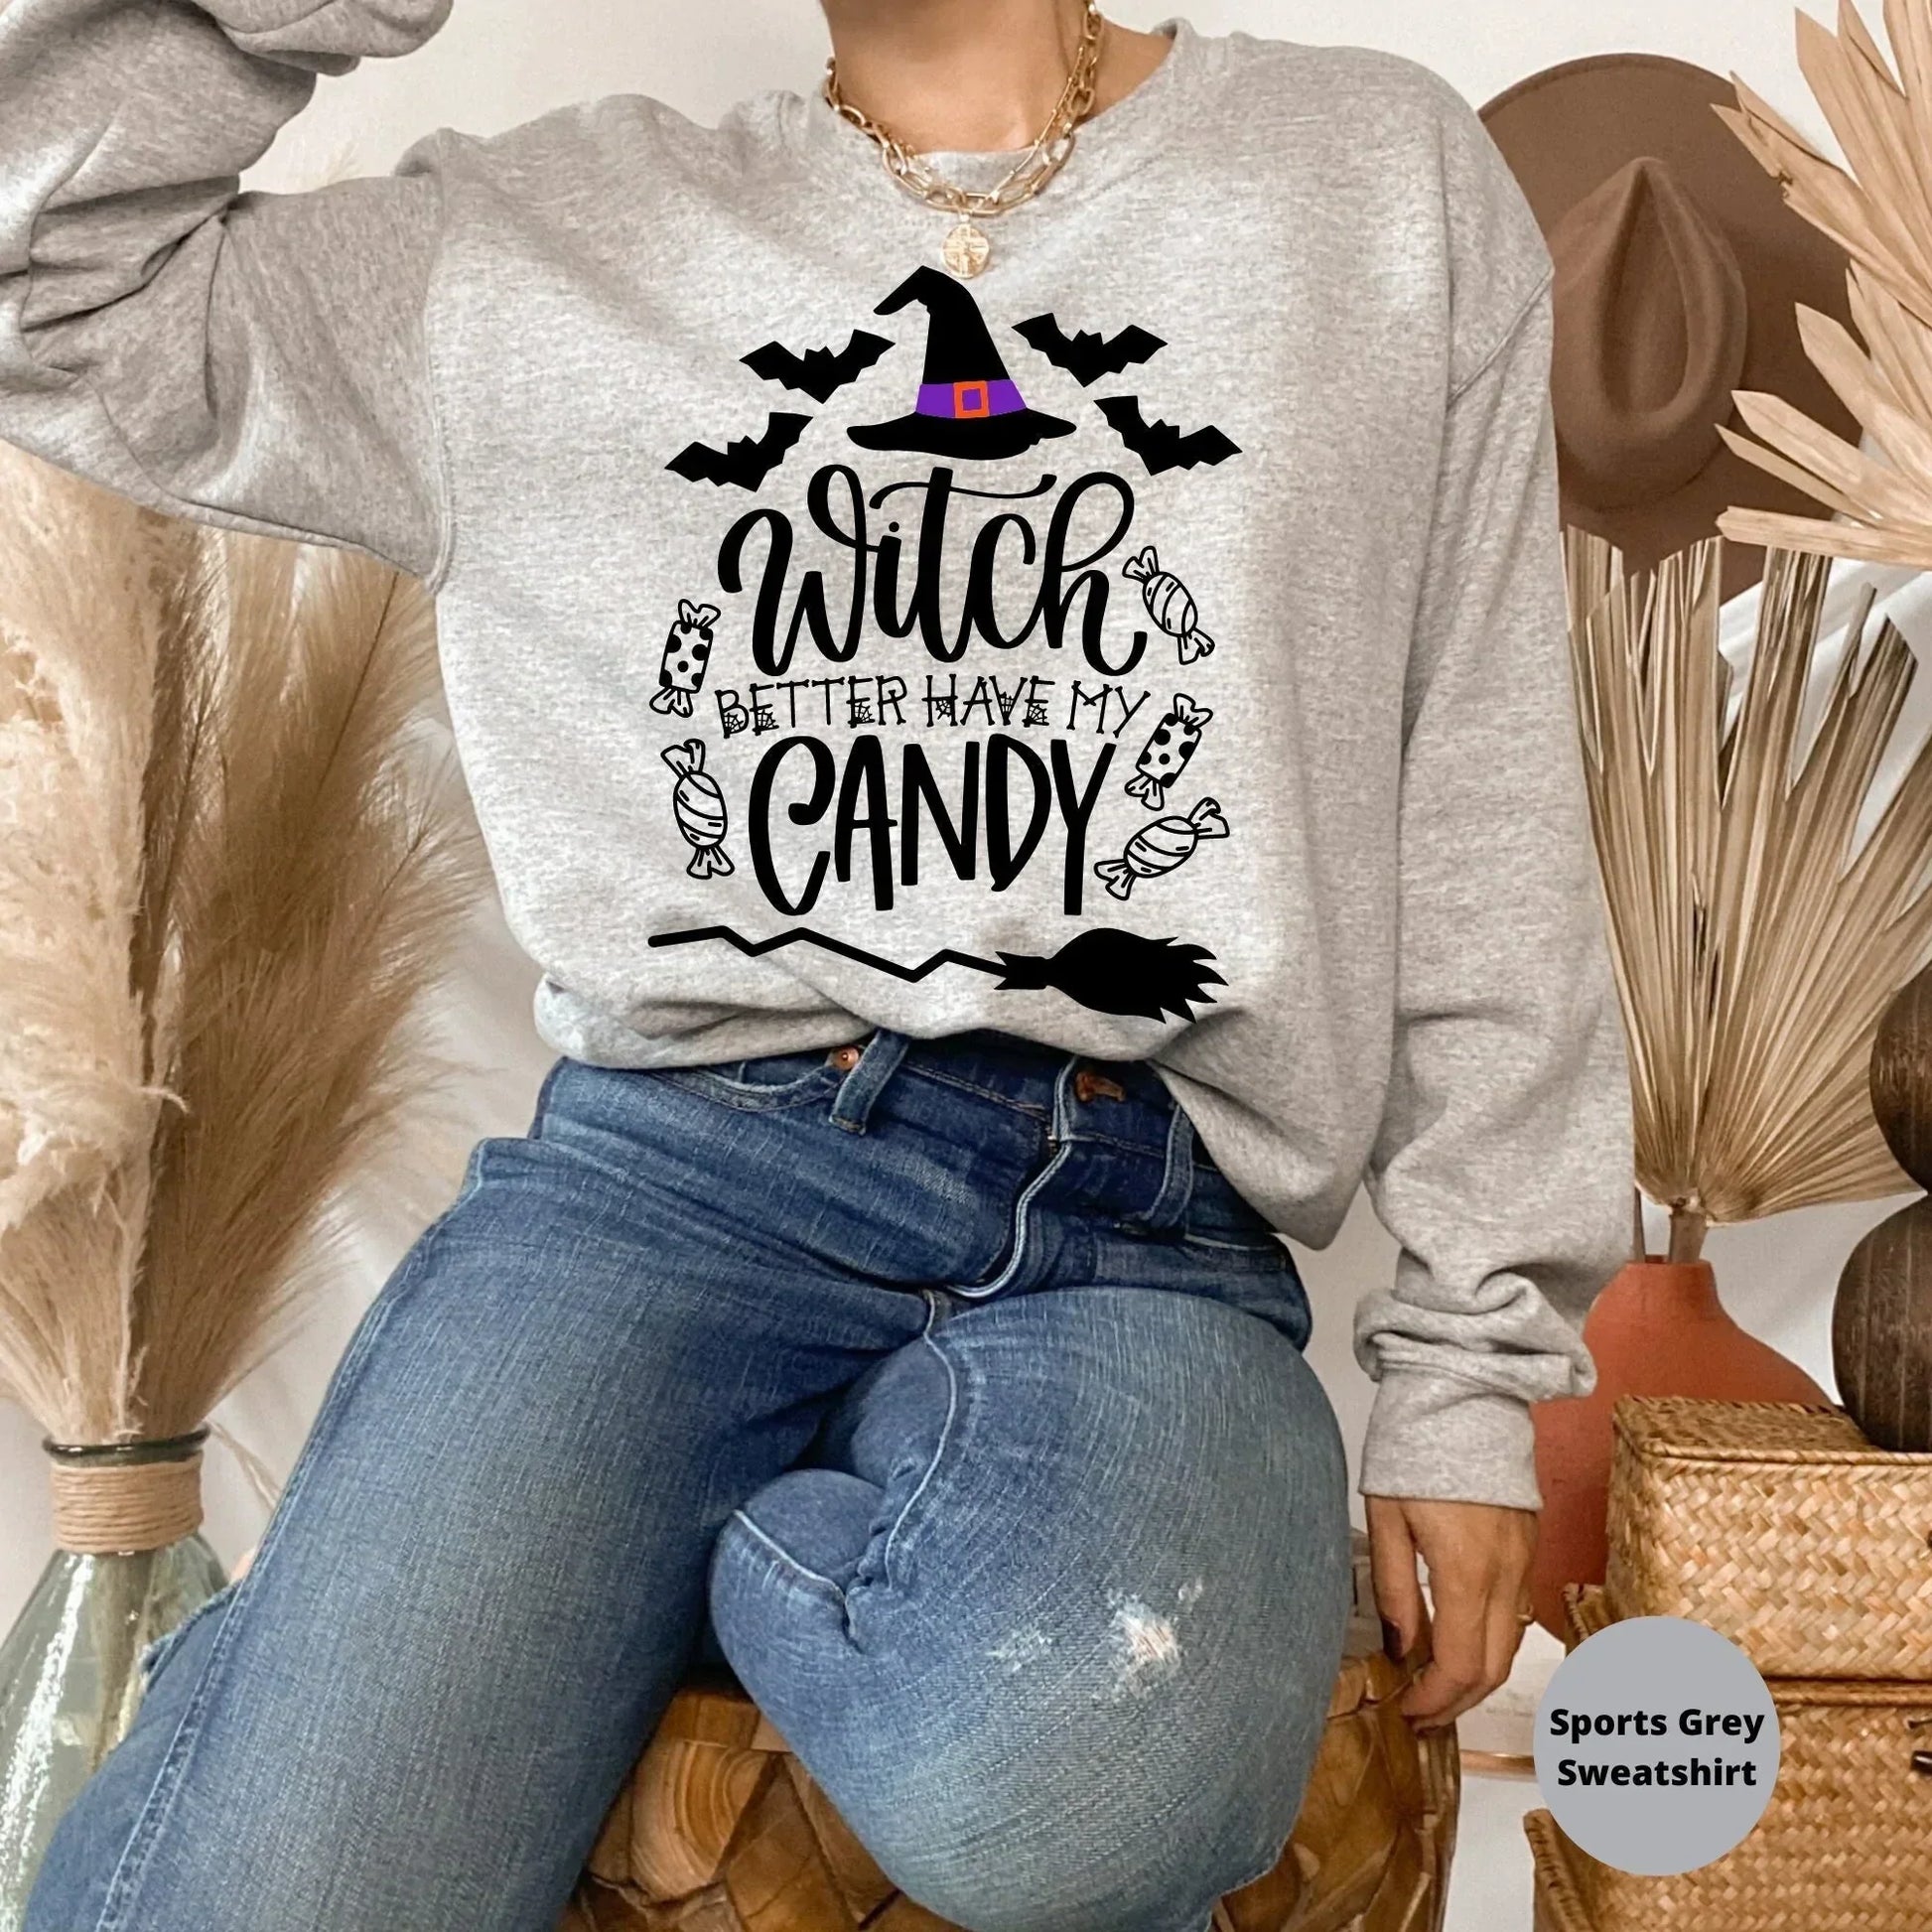 Halloween Shirt, Halloween Sweater, Witch Better Have my Candy, Funny Halloween Party Crewneck, Cute Trick or Treat Halloween Sweatshirt